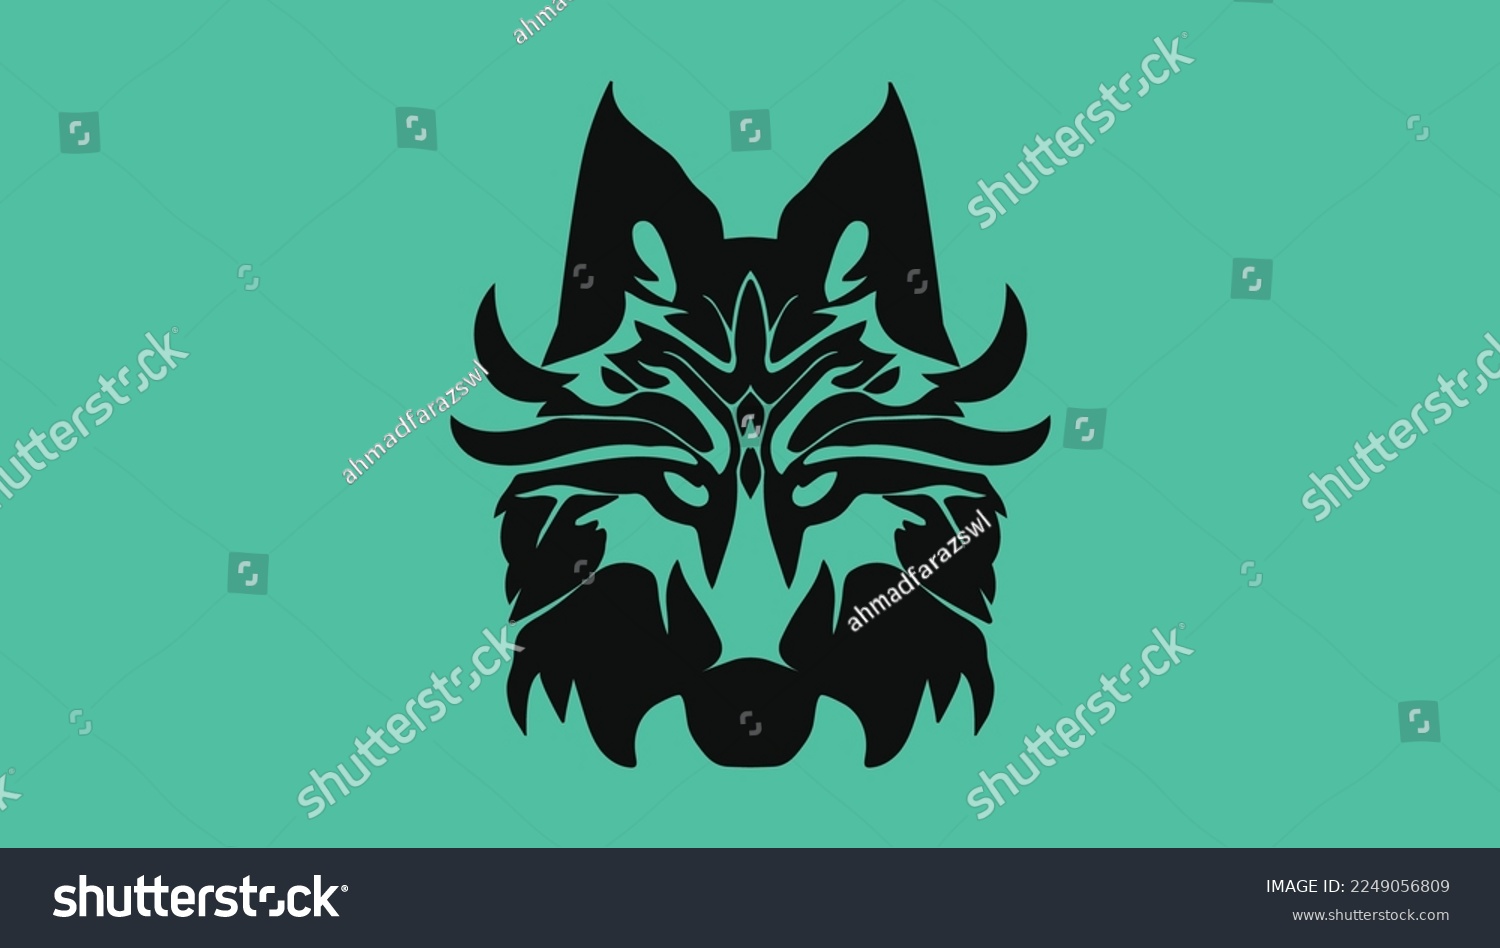 SVG of  A stylish and modern wolf or fox head logo design that embodies professionalism svg